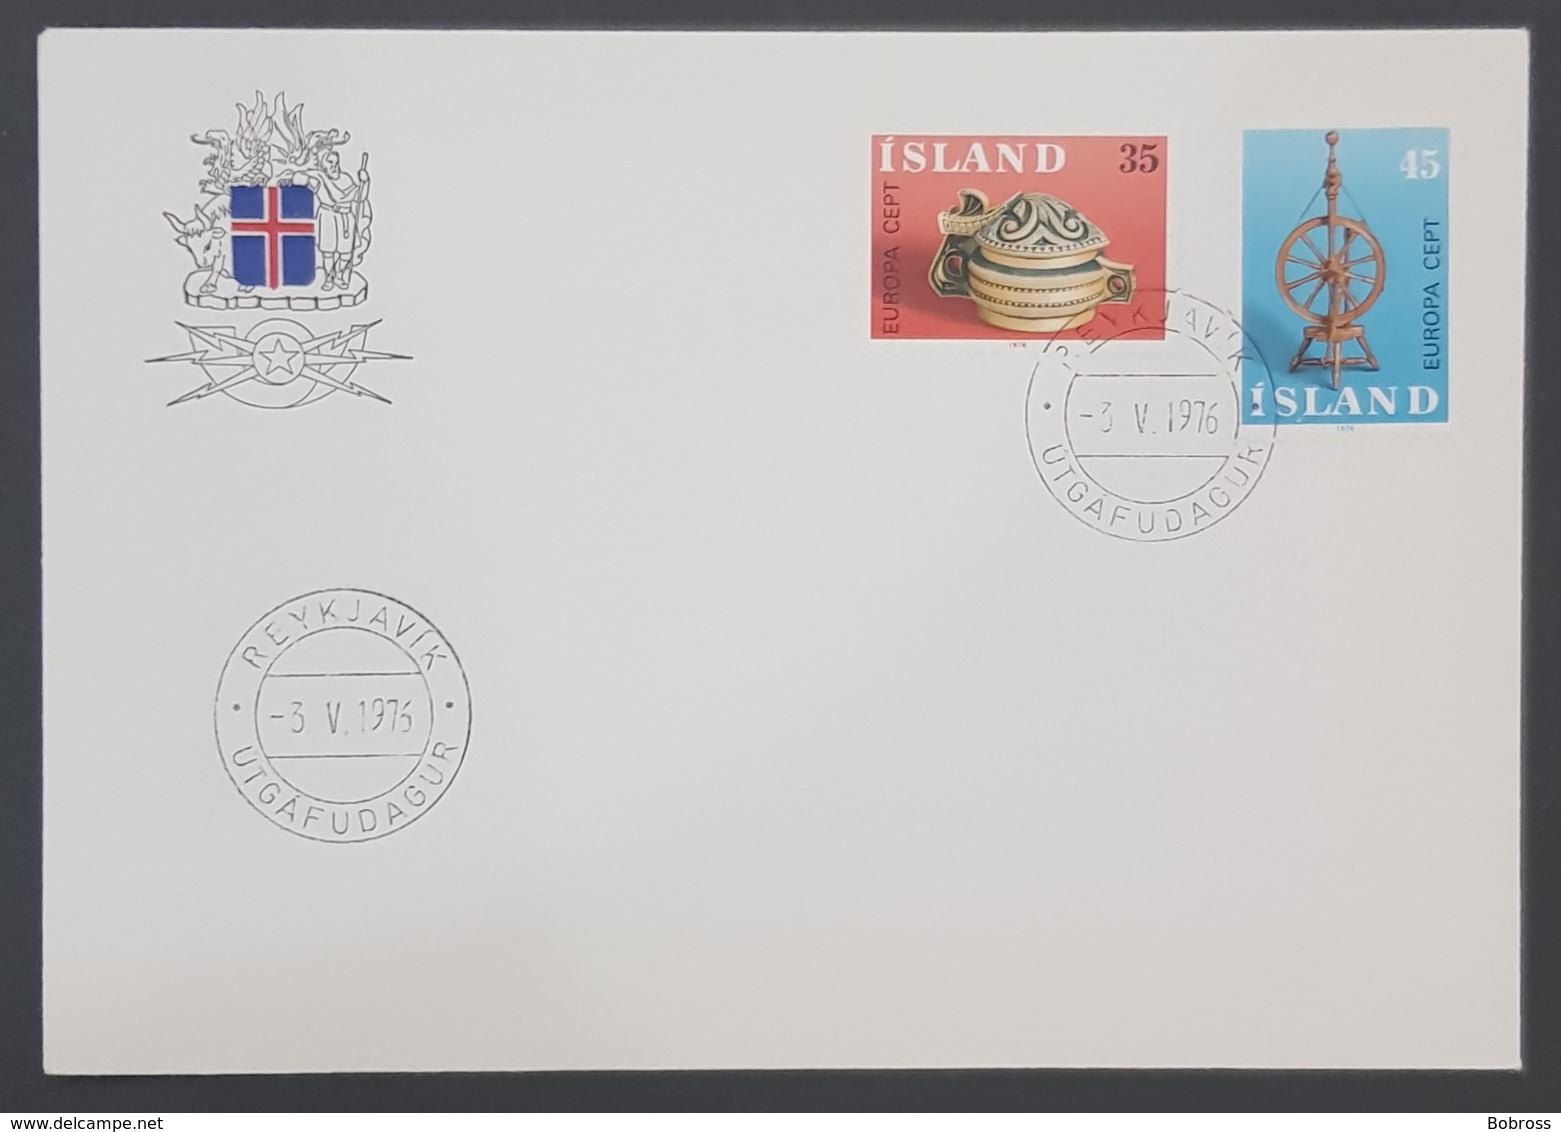 1976 Cover, Reykjavik Island, Iceland, Europa Cept - Covers & Documents